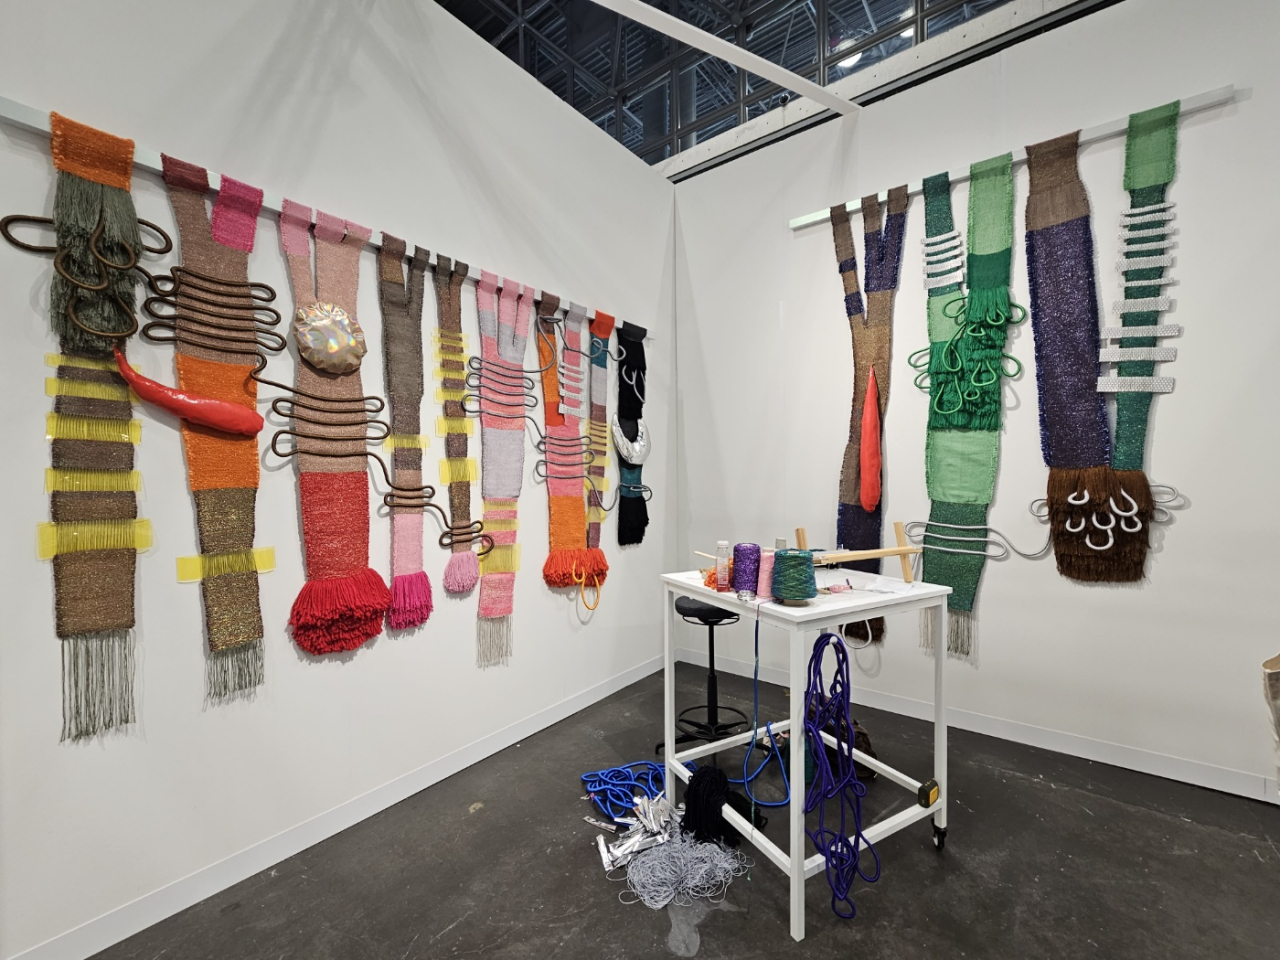 The studio of tapestry artist Desire Moheb-Zandi is seen at the Dio Horia gallery's booth at The Armory Show in New York. (Park Yuna/The Korea Herald)